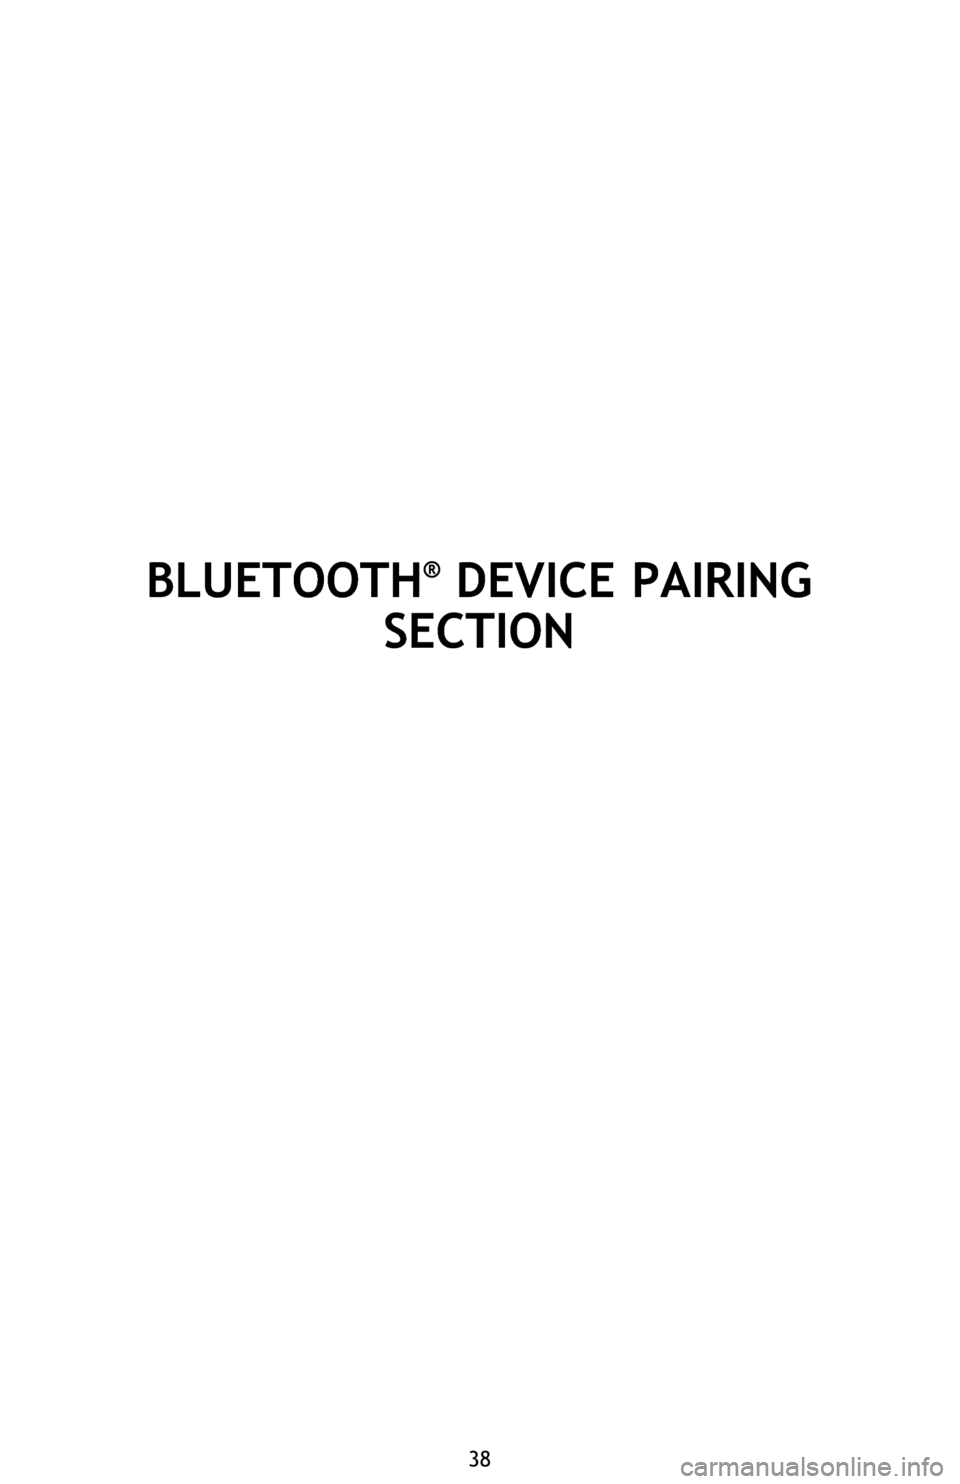 TOYOTA HIGHLANDER 2016 XU50 / 3.G Quick Reference Guide 38
BLUETOOTH® DEVICE PAIRING 
SECTION 